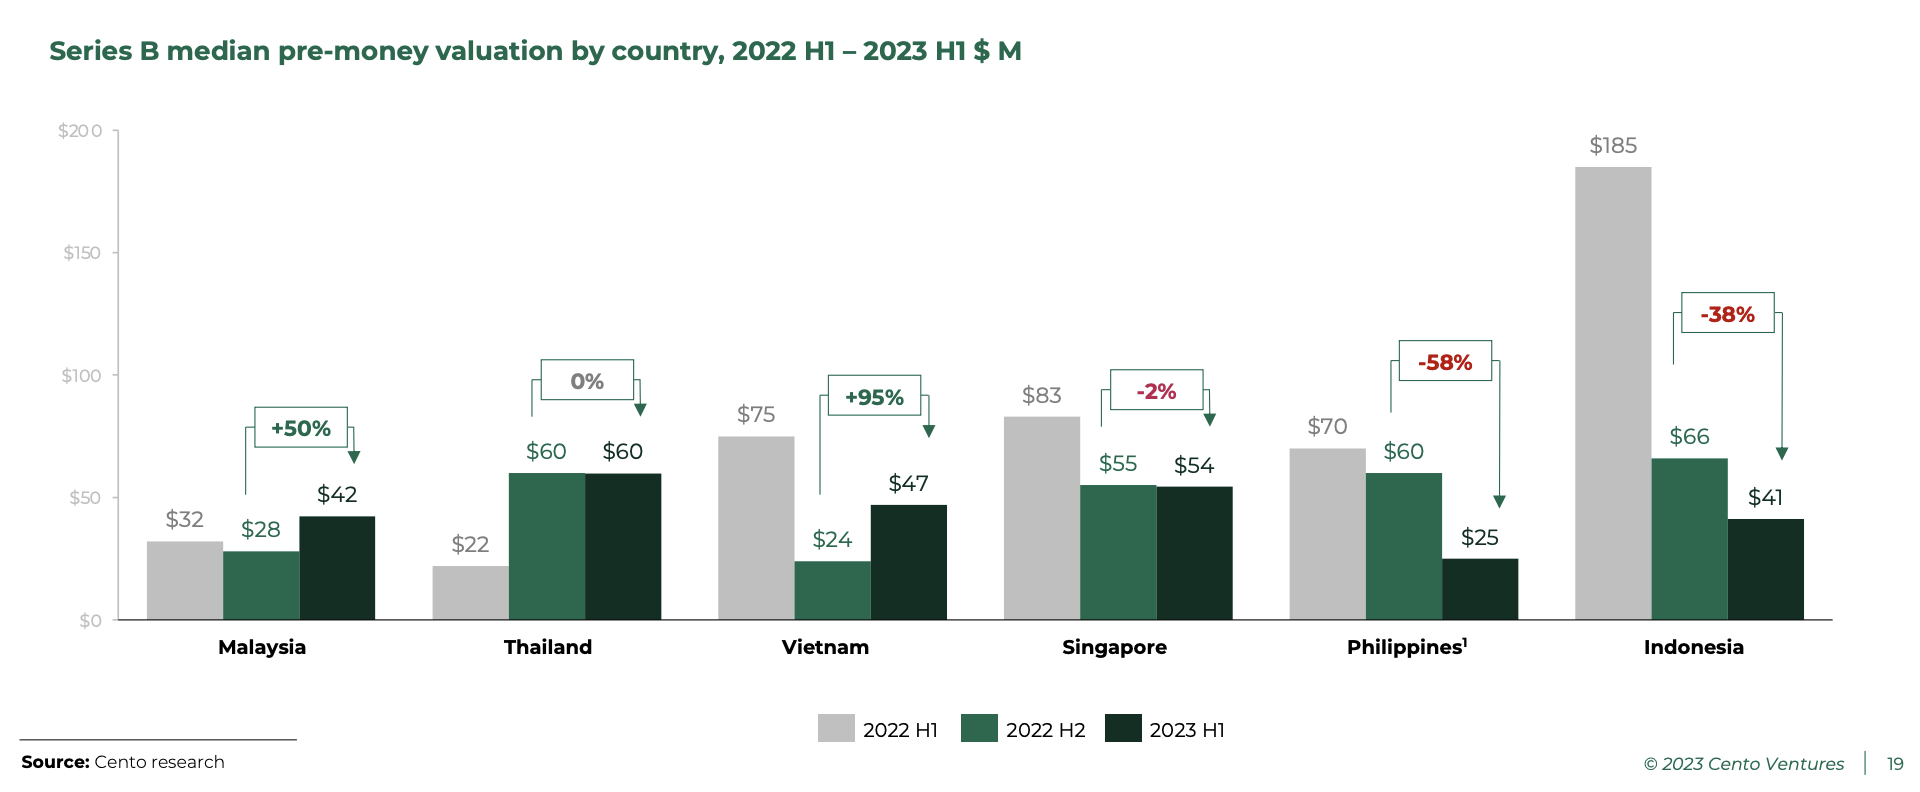 Series B median pre-money valuation by country, 2022 H1 – 2023 H1 US$ million, Source: Southeast Asia Tech Investment 2023 H1, Cento Ventures, Dec 2023